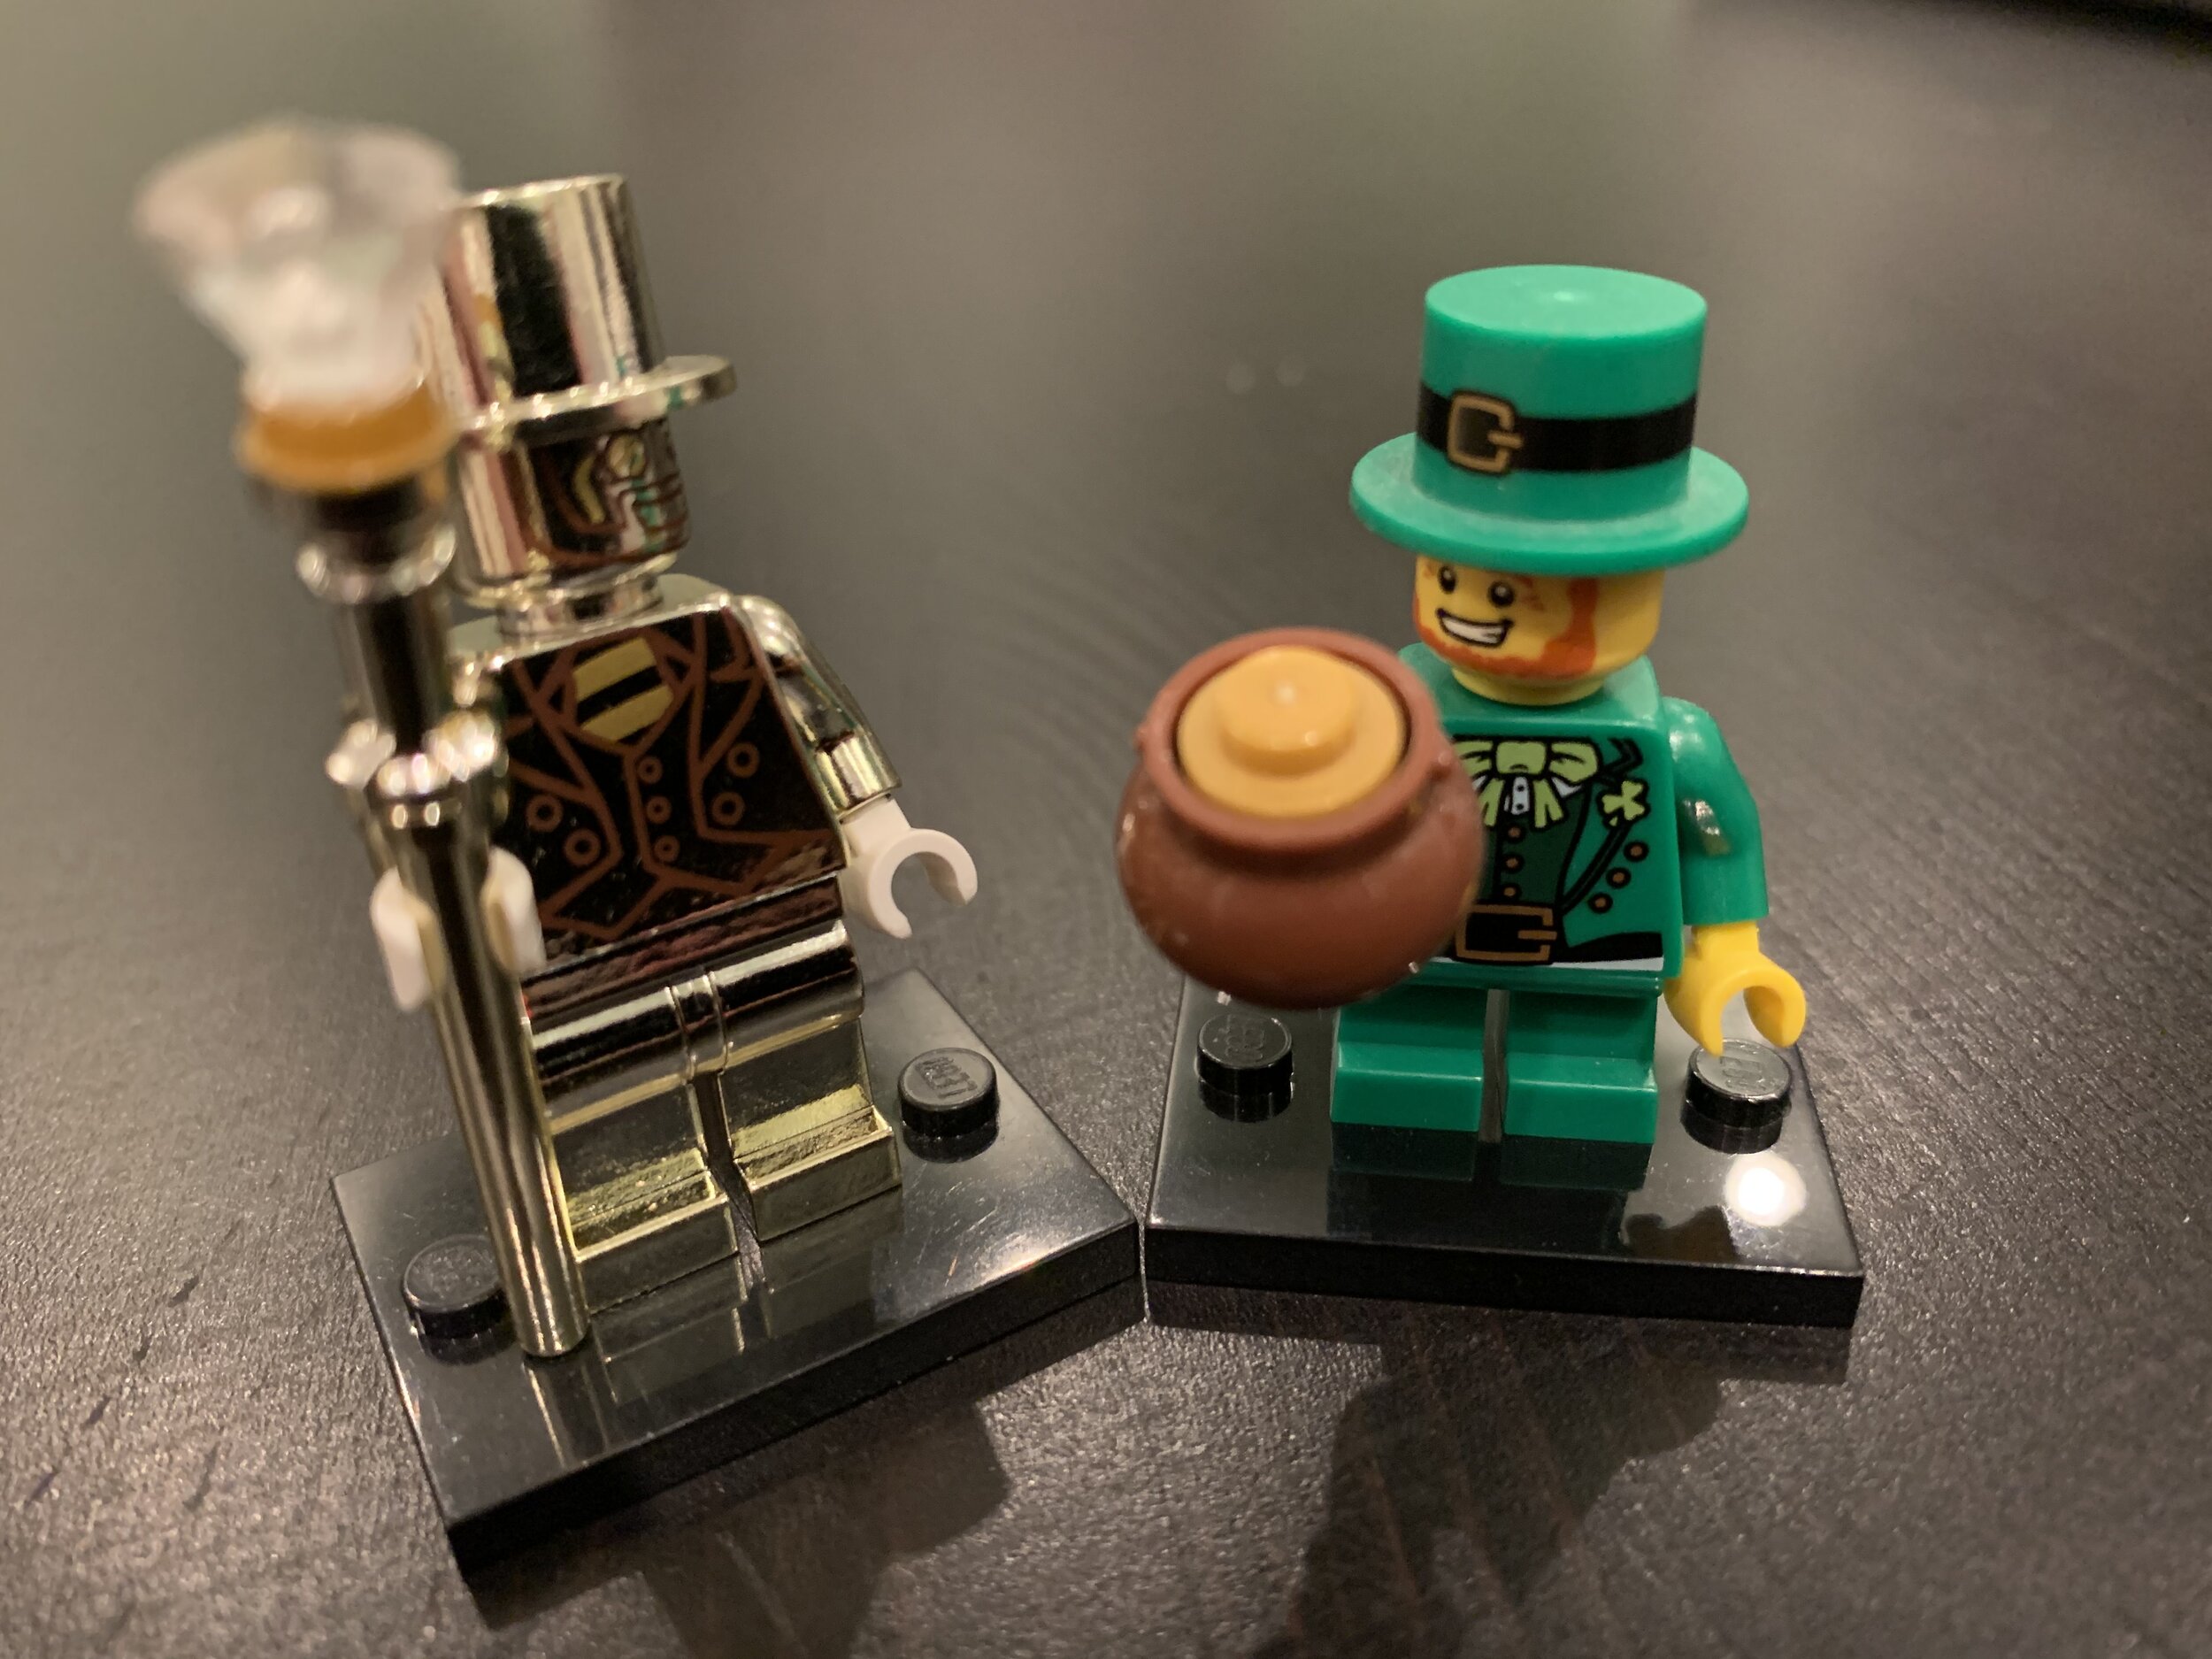 Foragt Lægge sammen ekko How I Ended Up With the World's Cheapest Mr. Gold - BrickNerd - All things  LEGO and the LEGO fan community